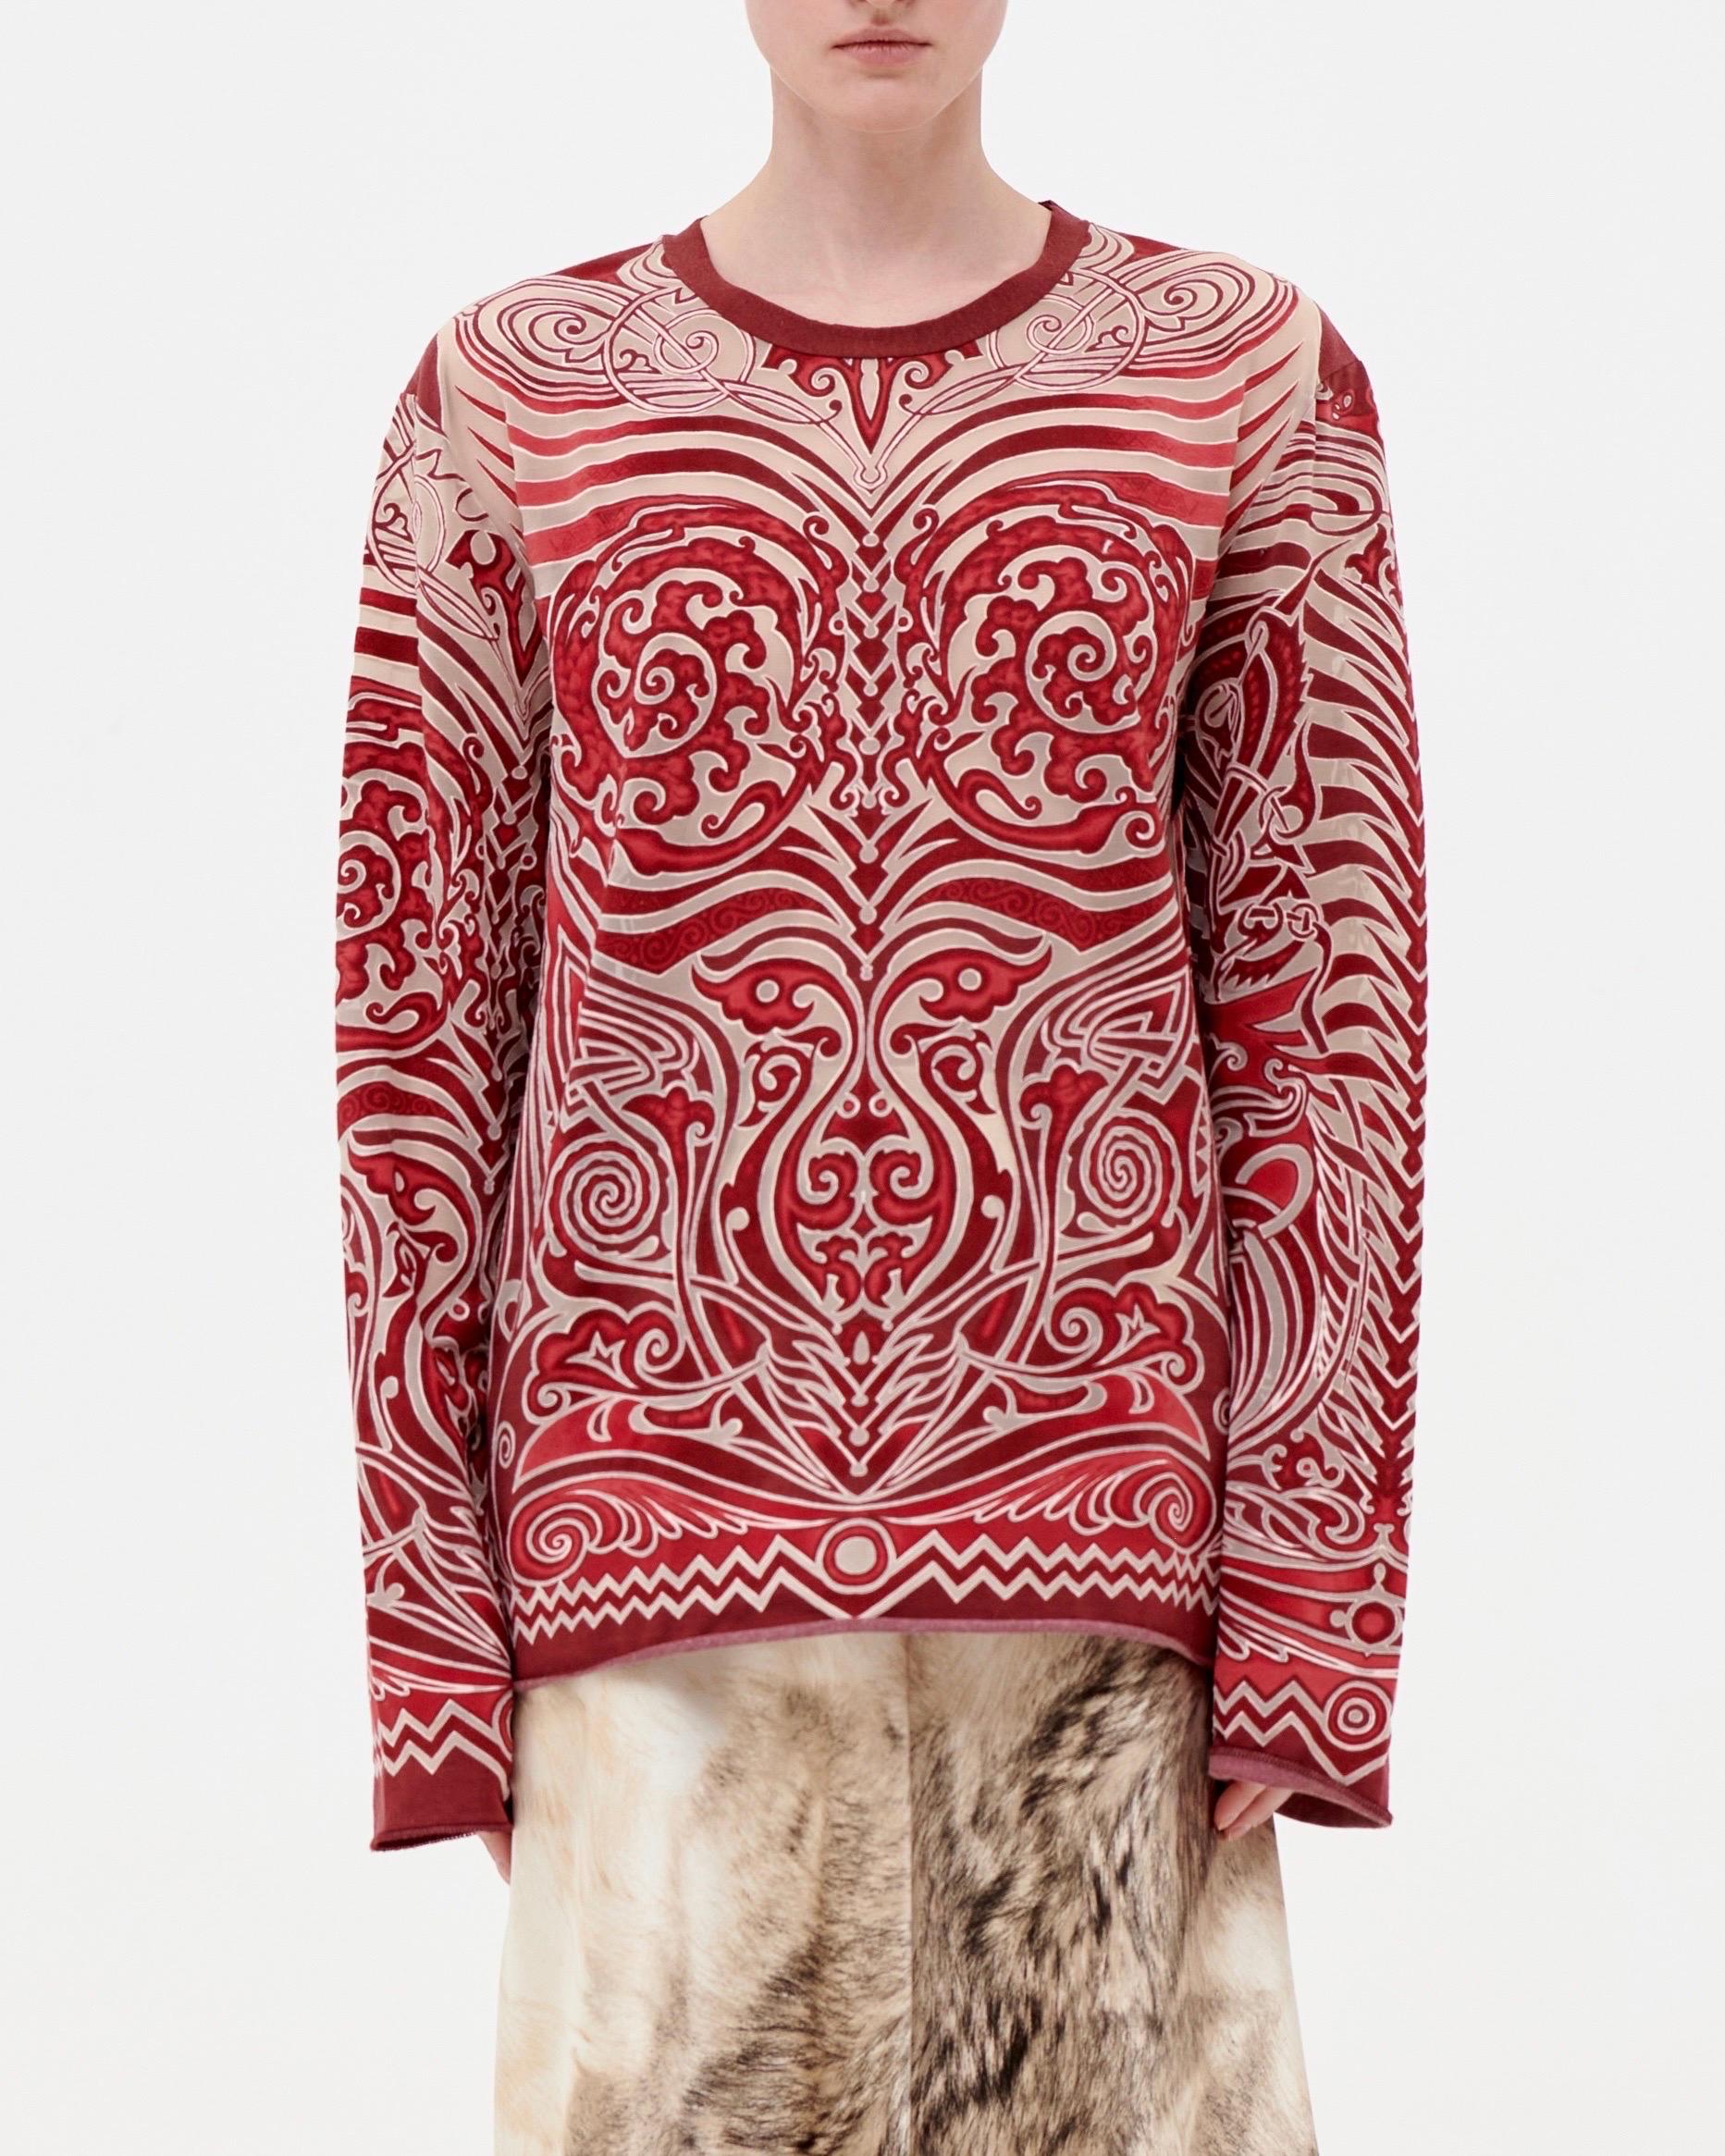 • Long sleeve top
• Red with mesh details
• Tribal dragon mesh motif